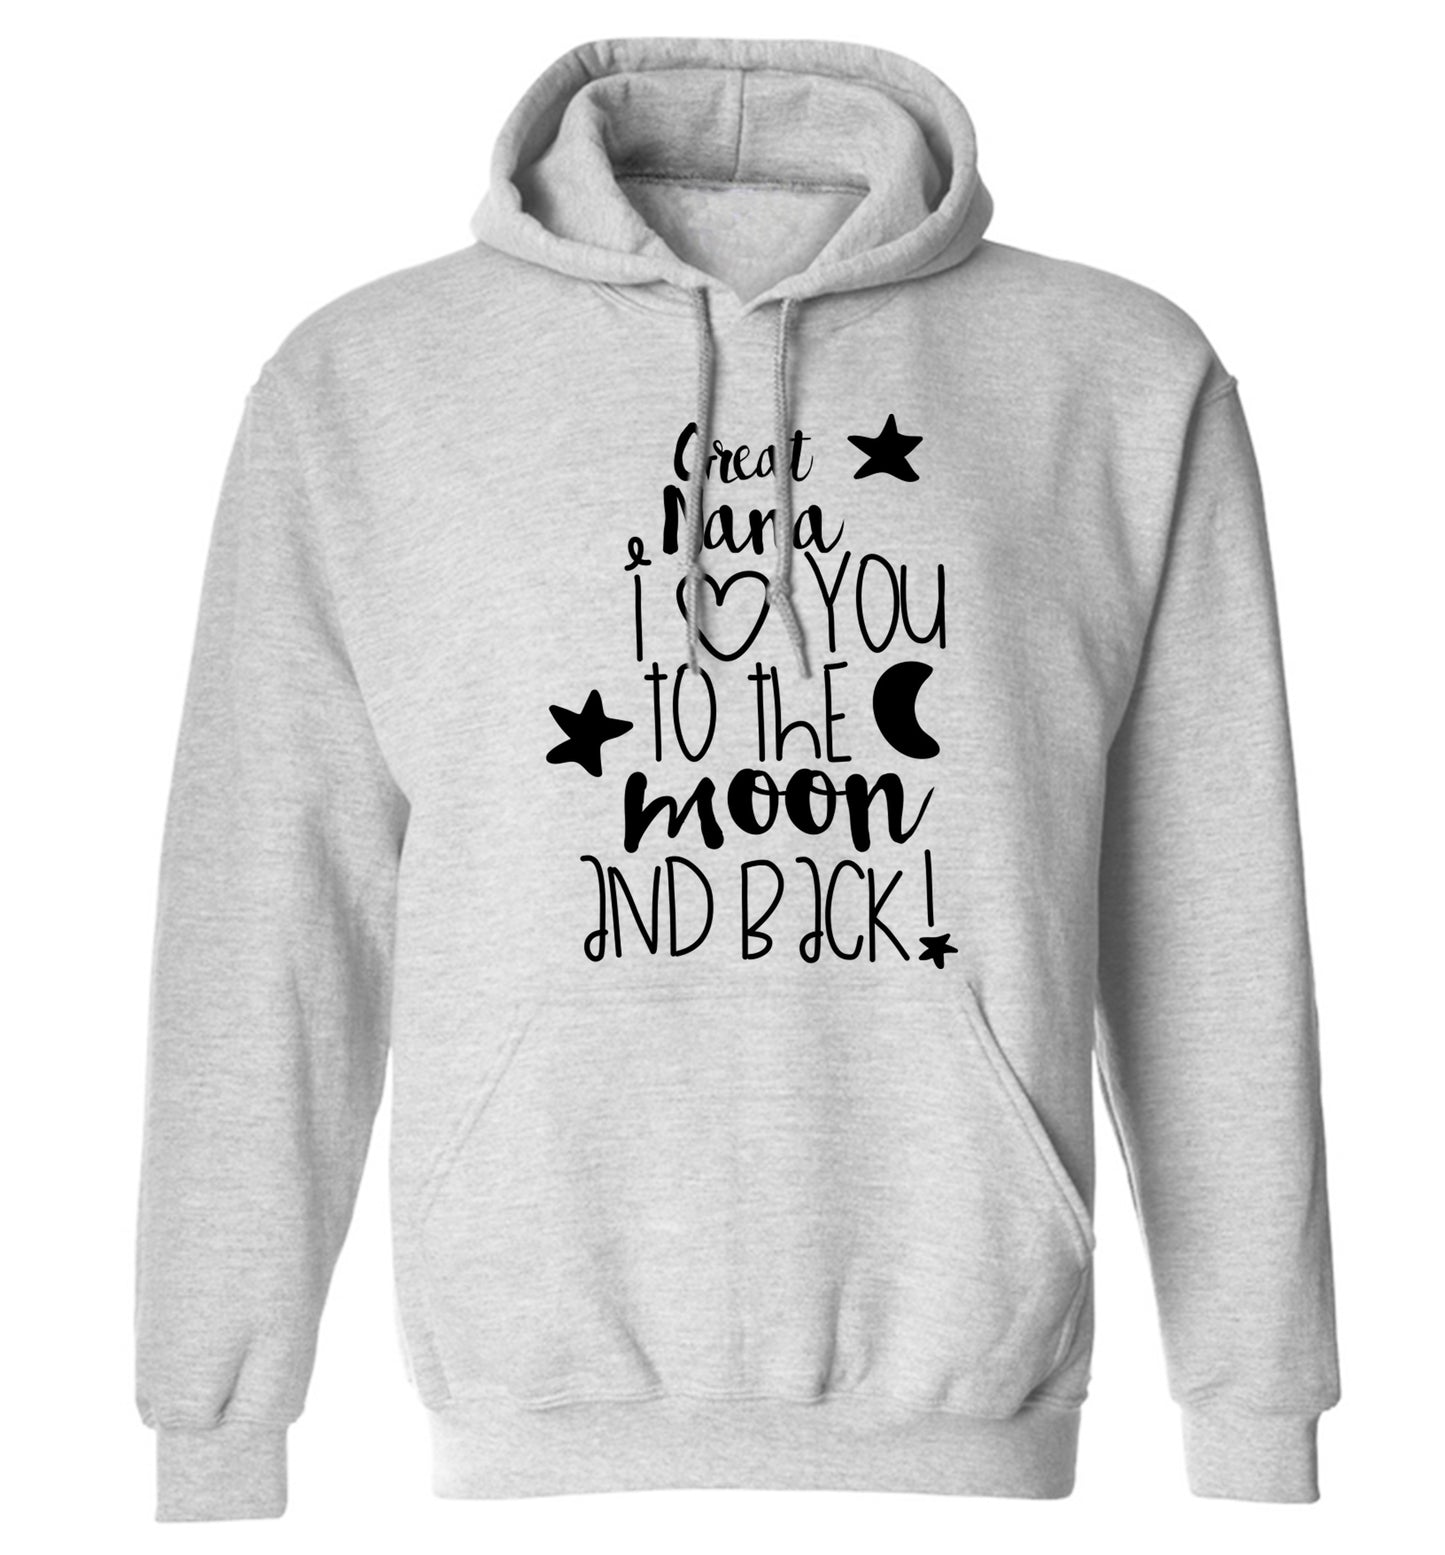 Great Nana I love you to the moon and back adults unisex grey hoodie 2XL